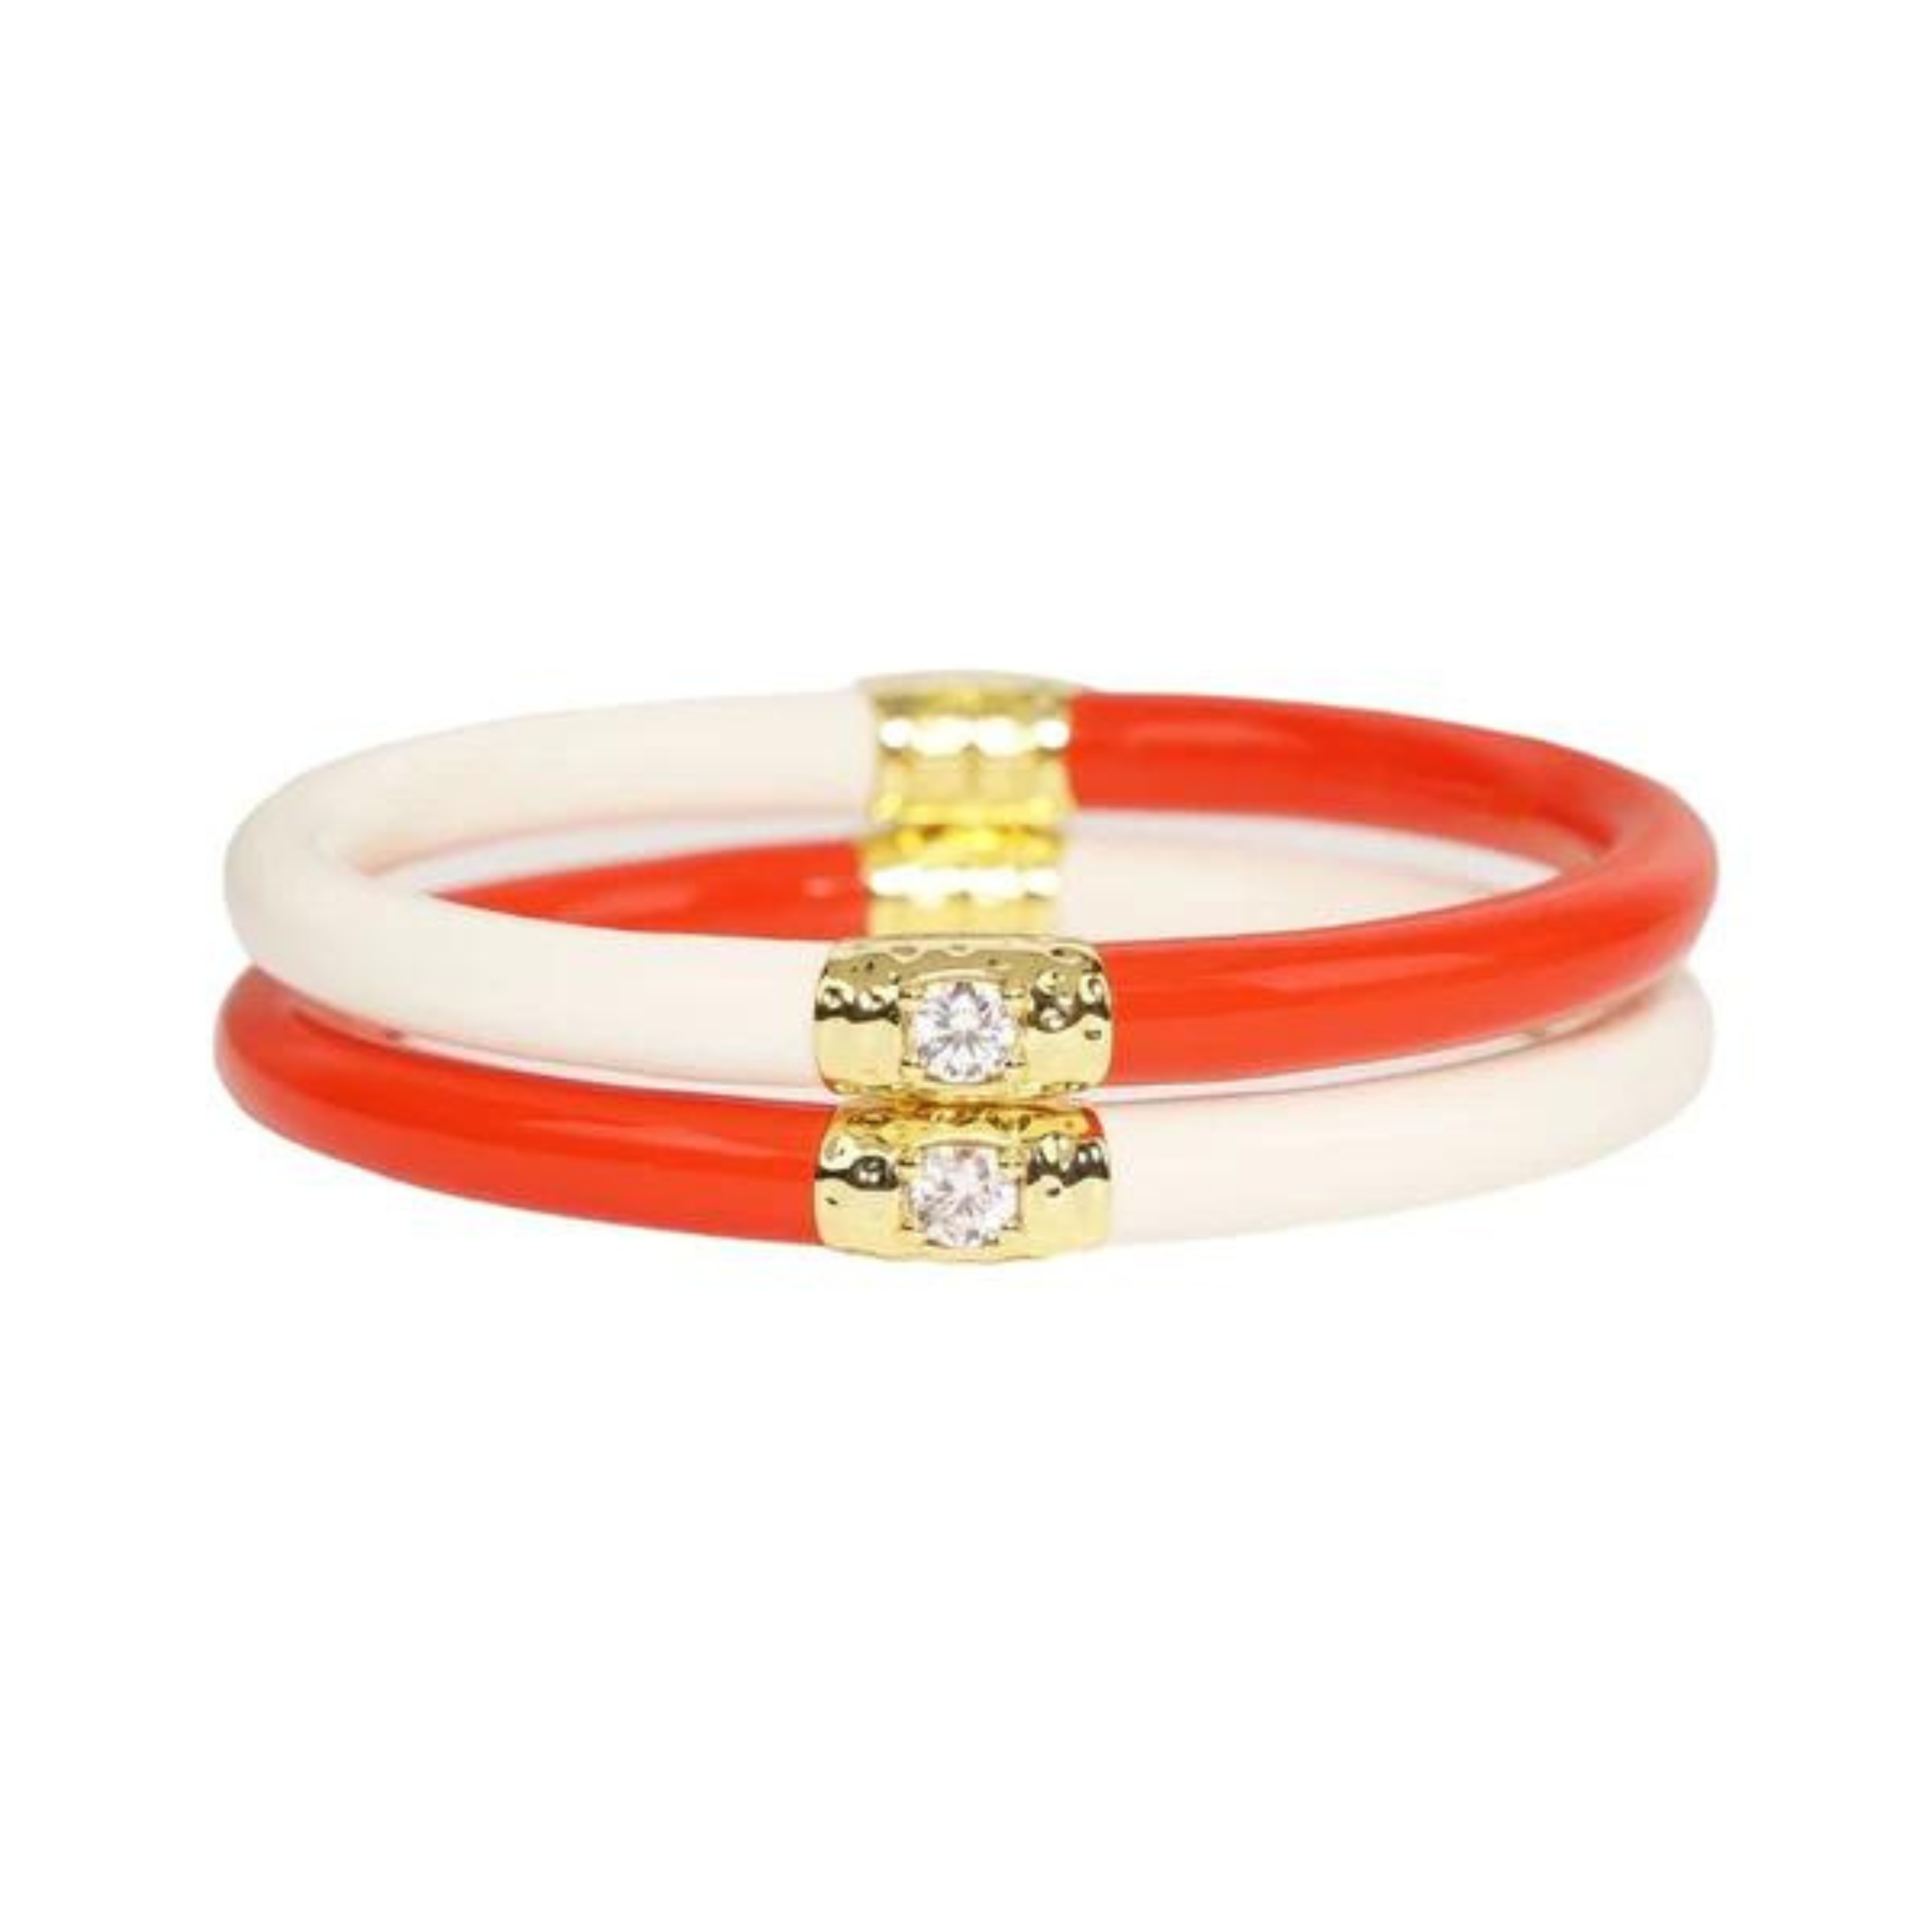 Two half white and half coral plastic, tube bracelet with two gold segments on the bracelet. These bracelets are pictured on top of each other on a white background. 